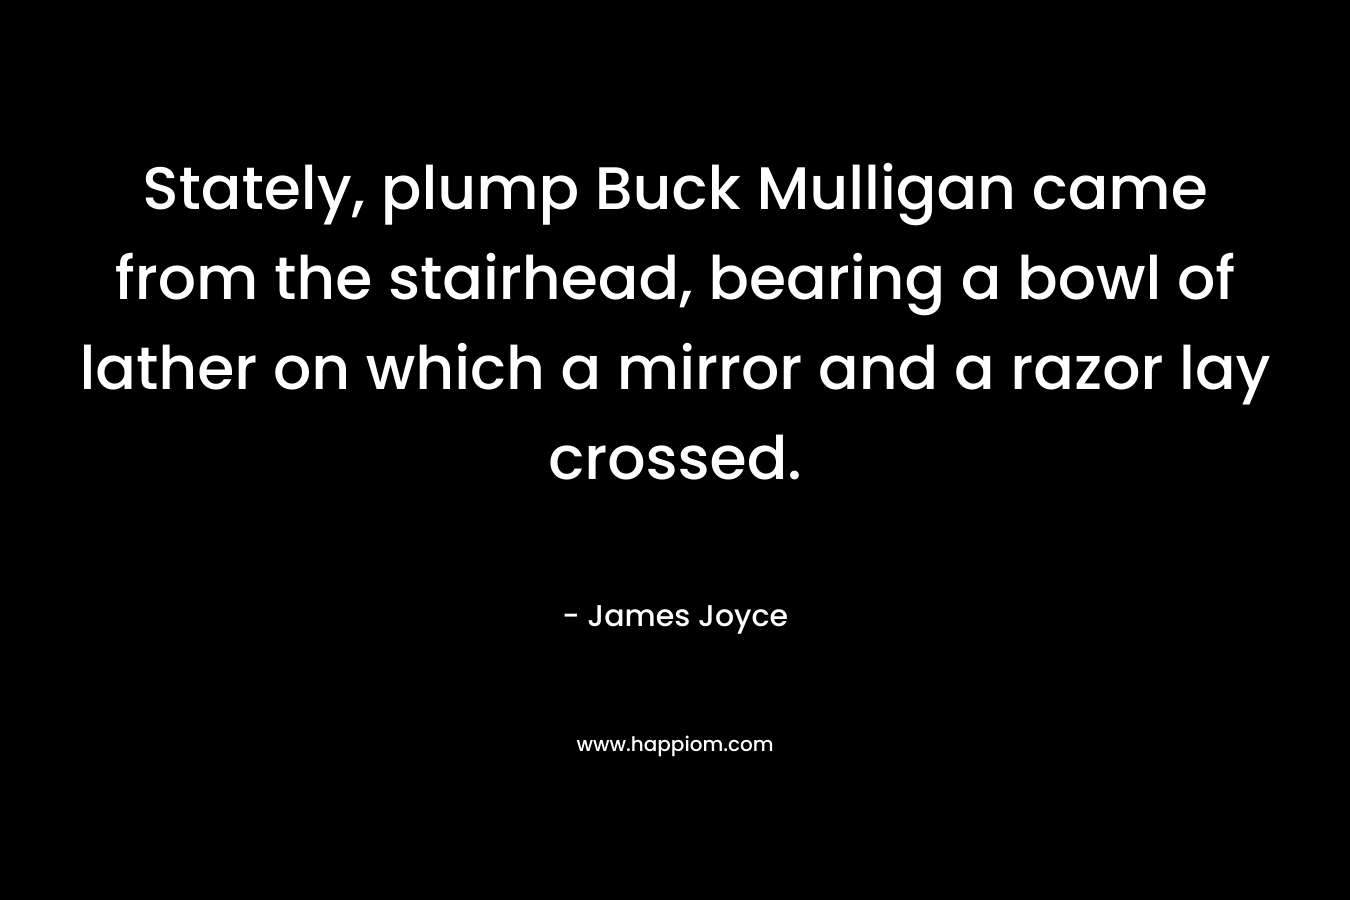 Stately, plump Buck Mulligan came from the stairhead, bearing a bowl of lather on which a mirror and a razor lay crossed. – James Joyce